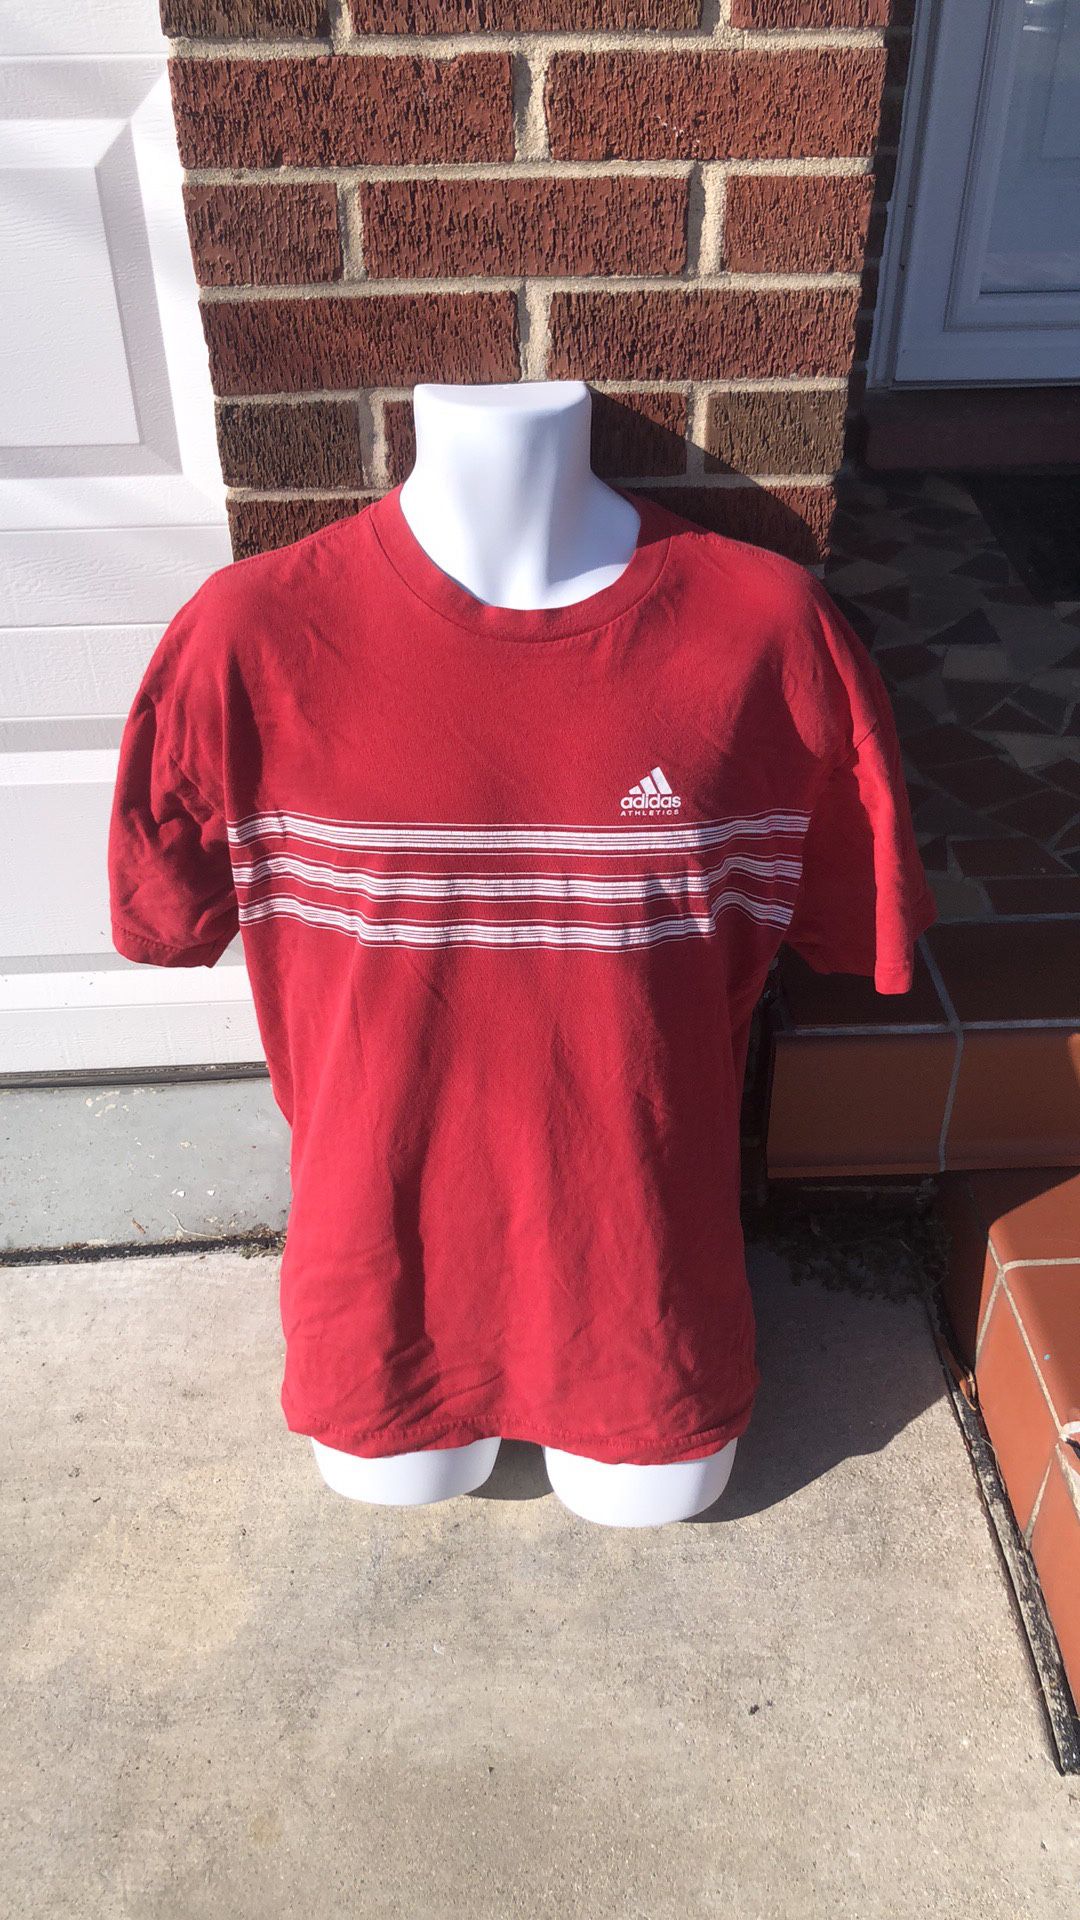 Men’s size LARGE red and white Adidas shirt